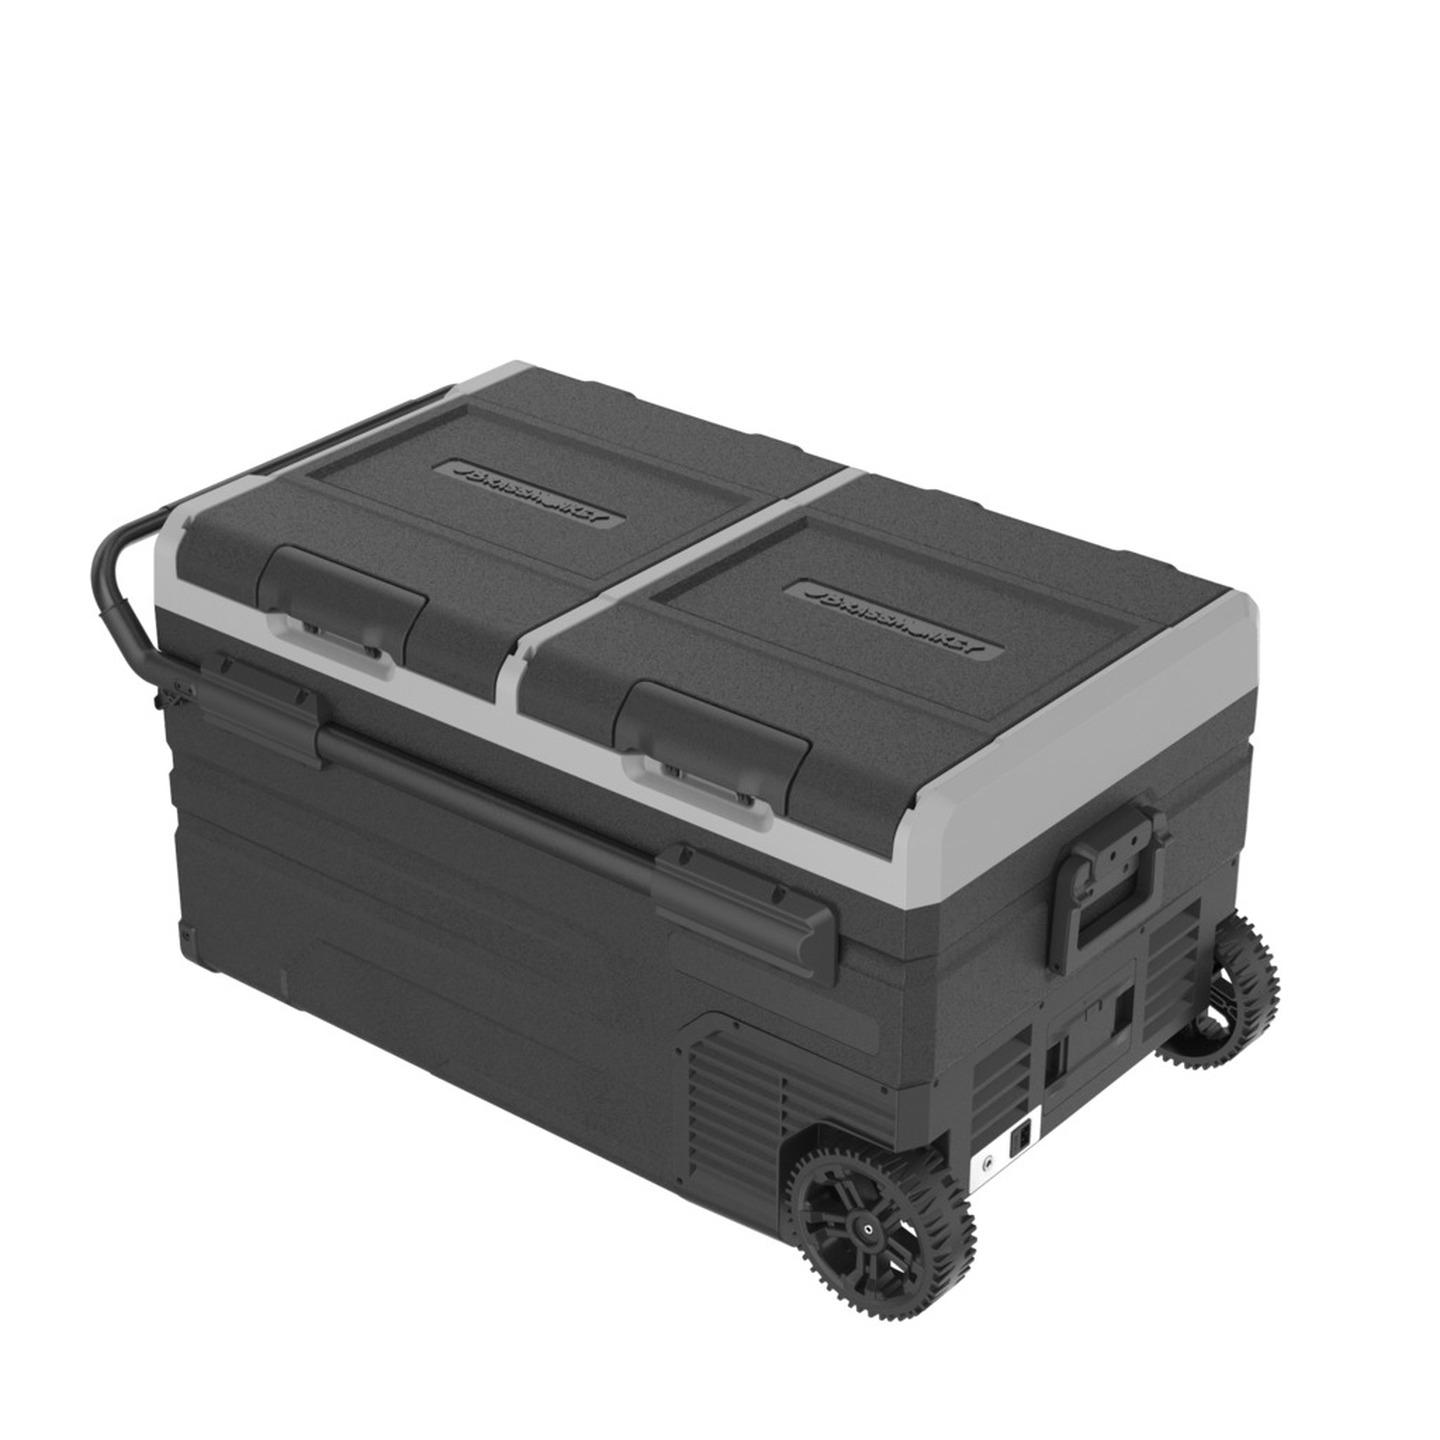 75L Brass Monkey Portable Low Profile Dual Zone Fridge/Freezer with Wheels and Battery Compartment